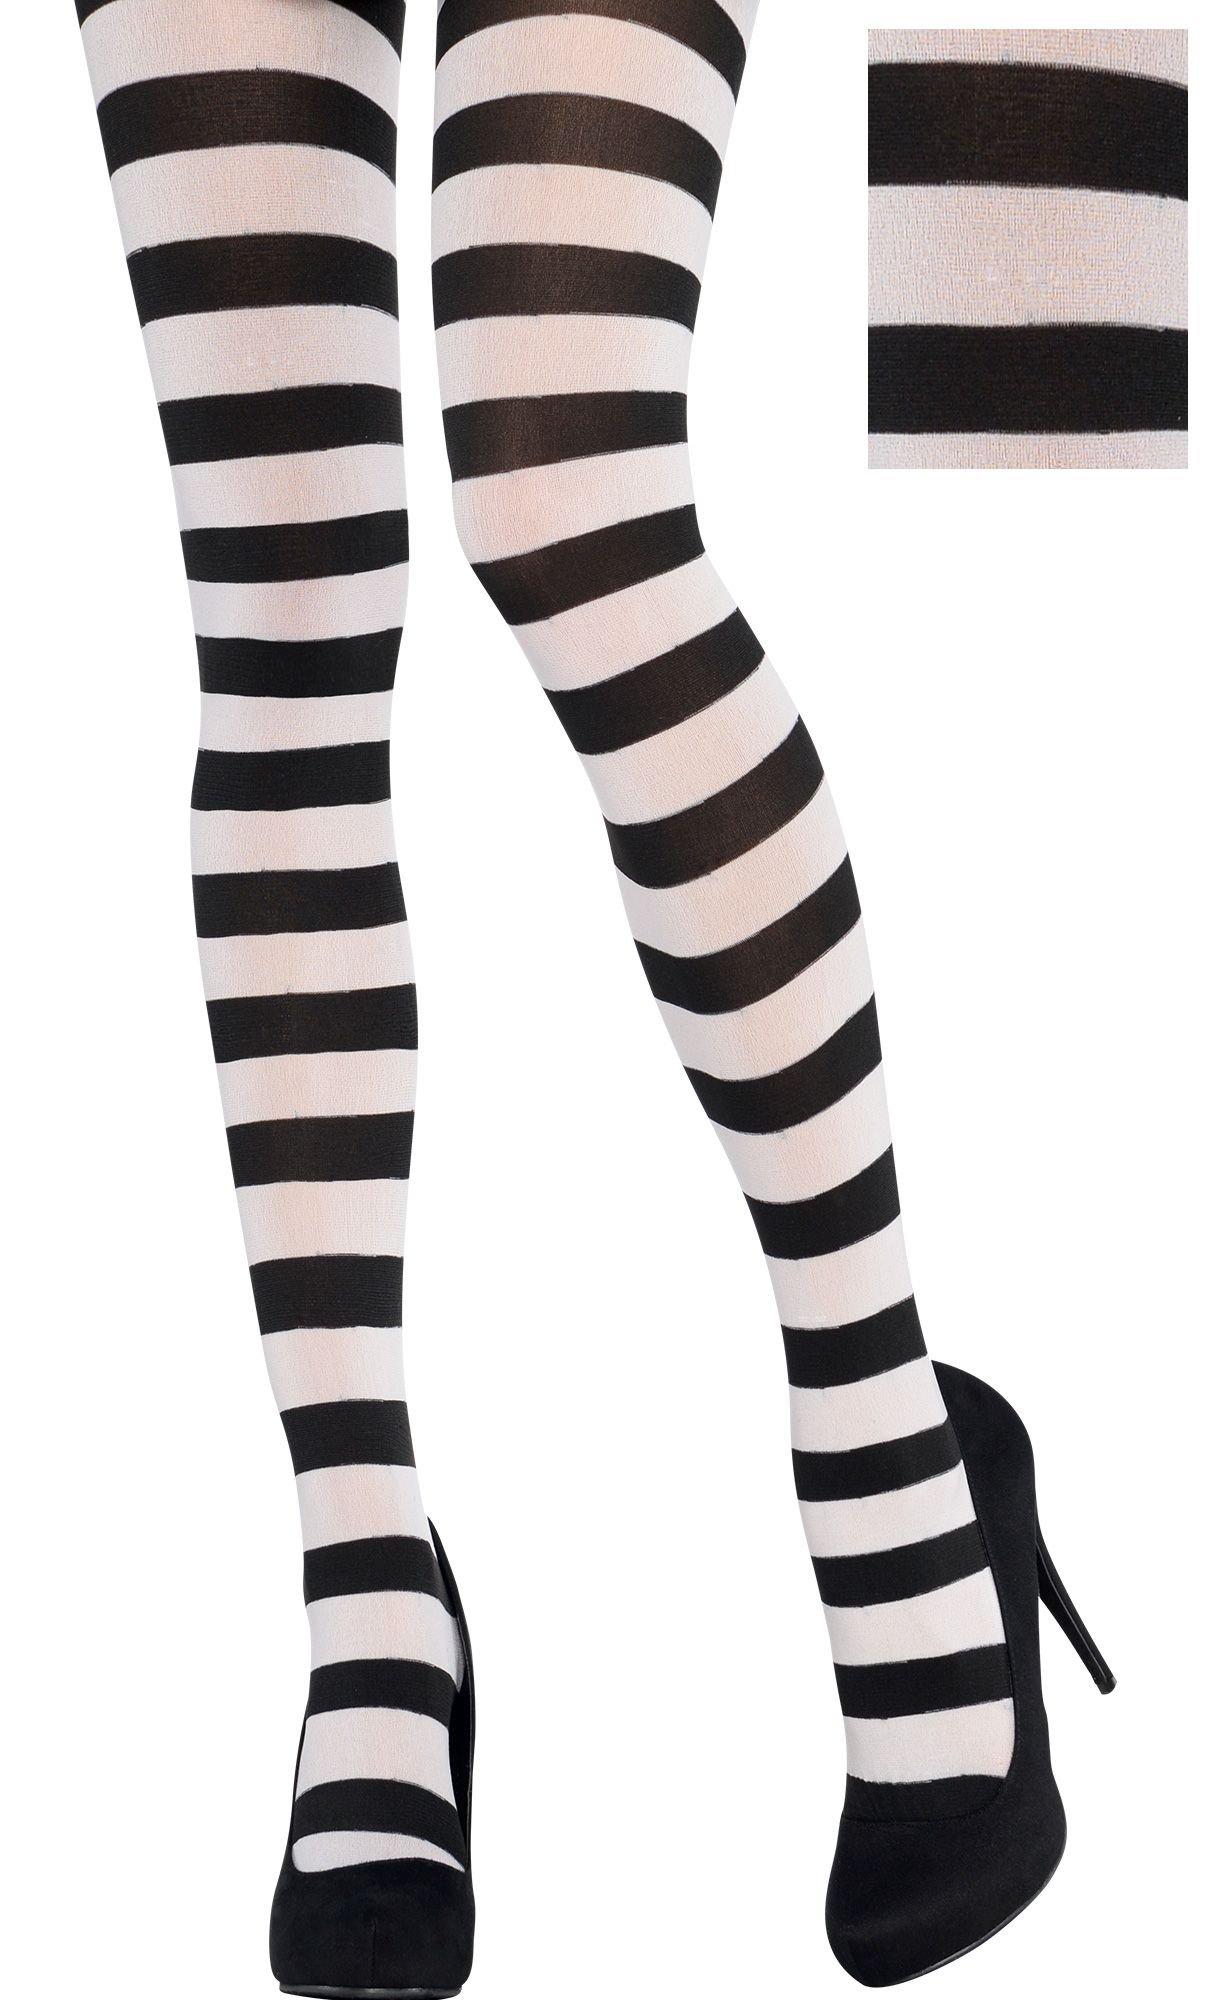 White/Black Striped Tights Halloween Tights by Doodys fancy Dress